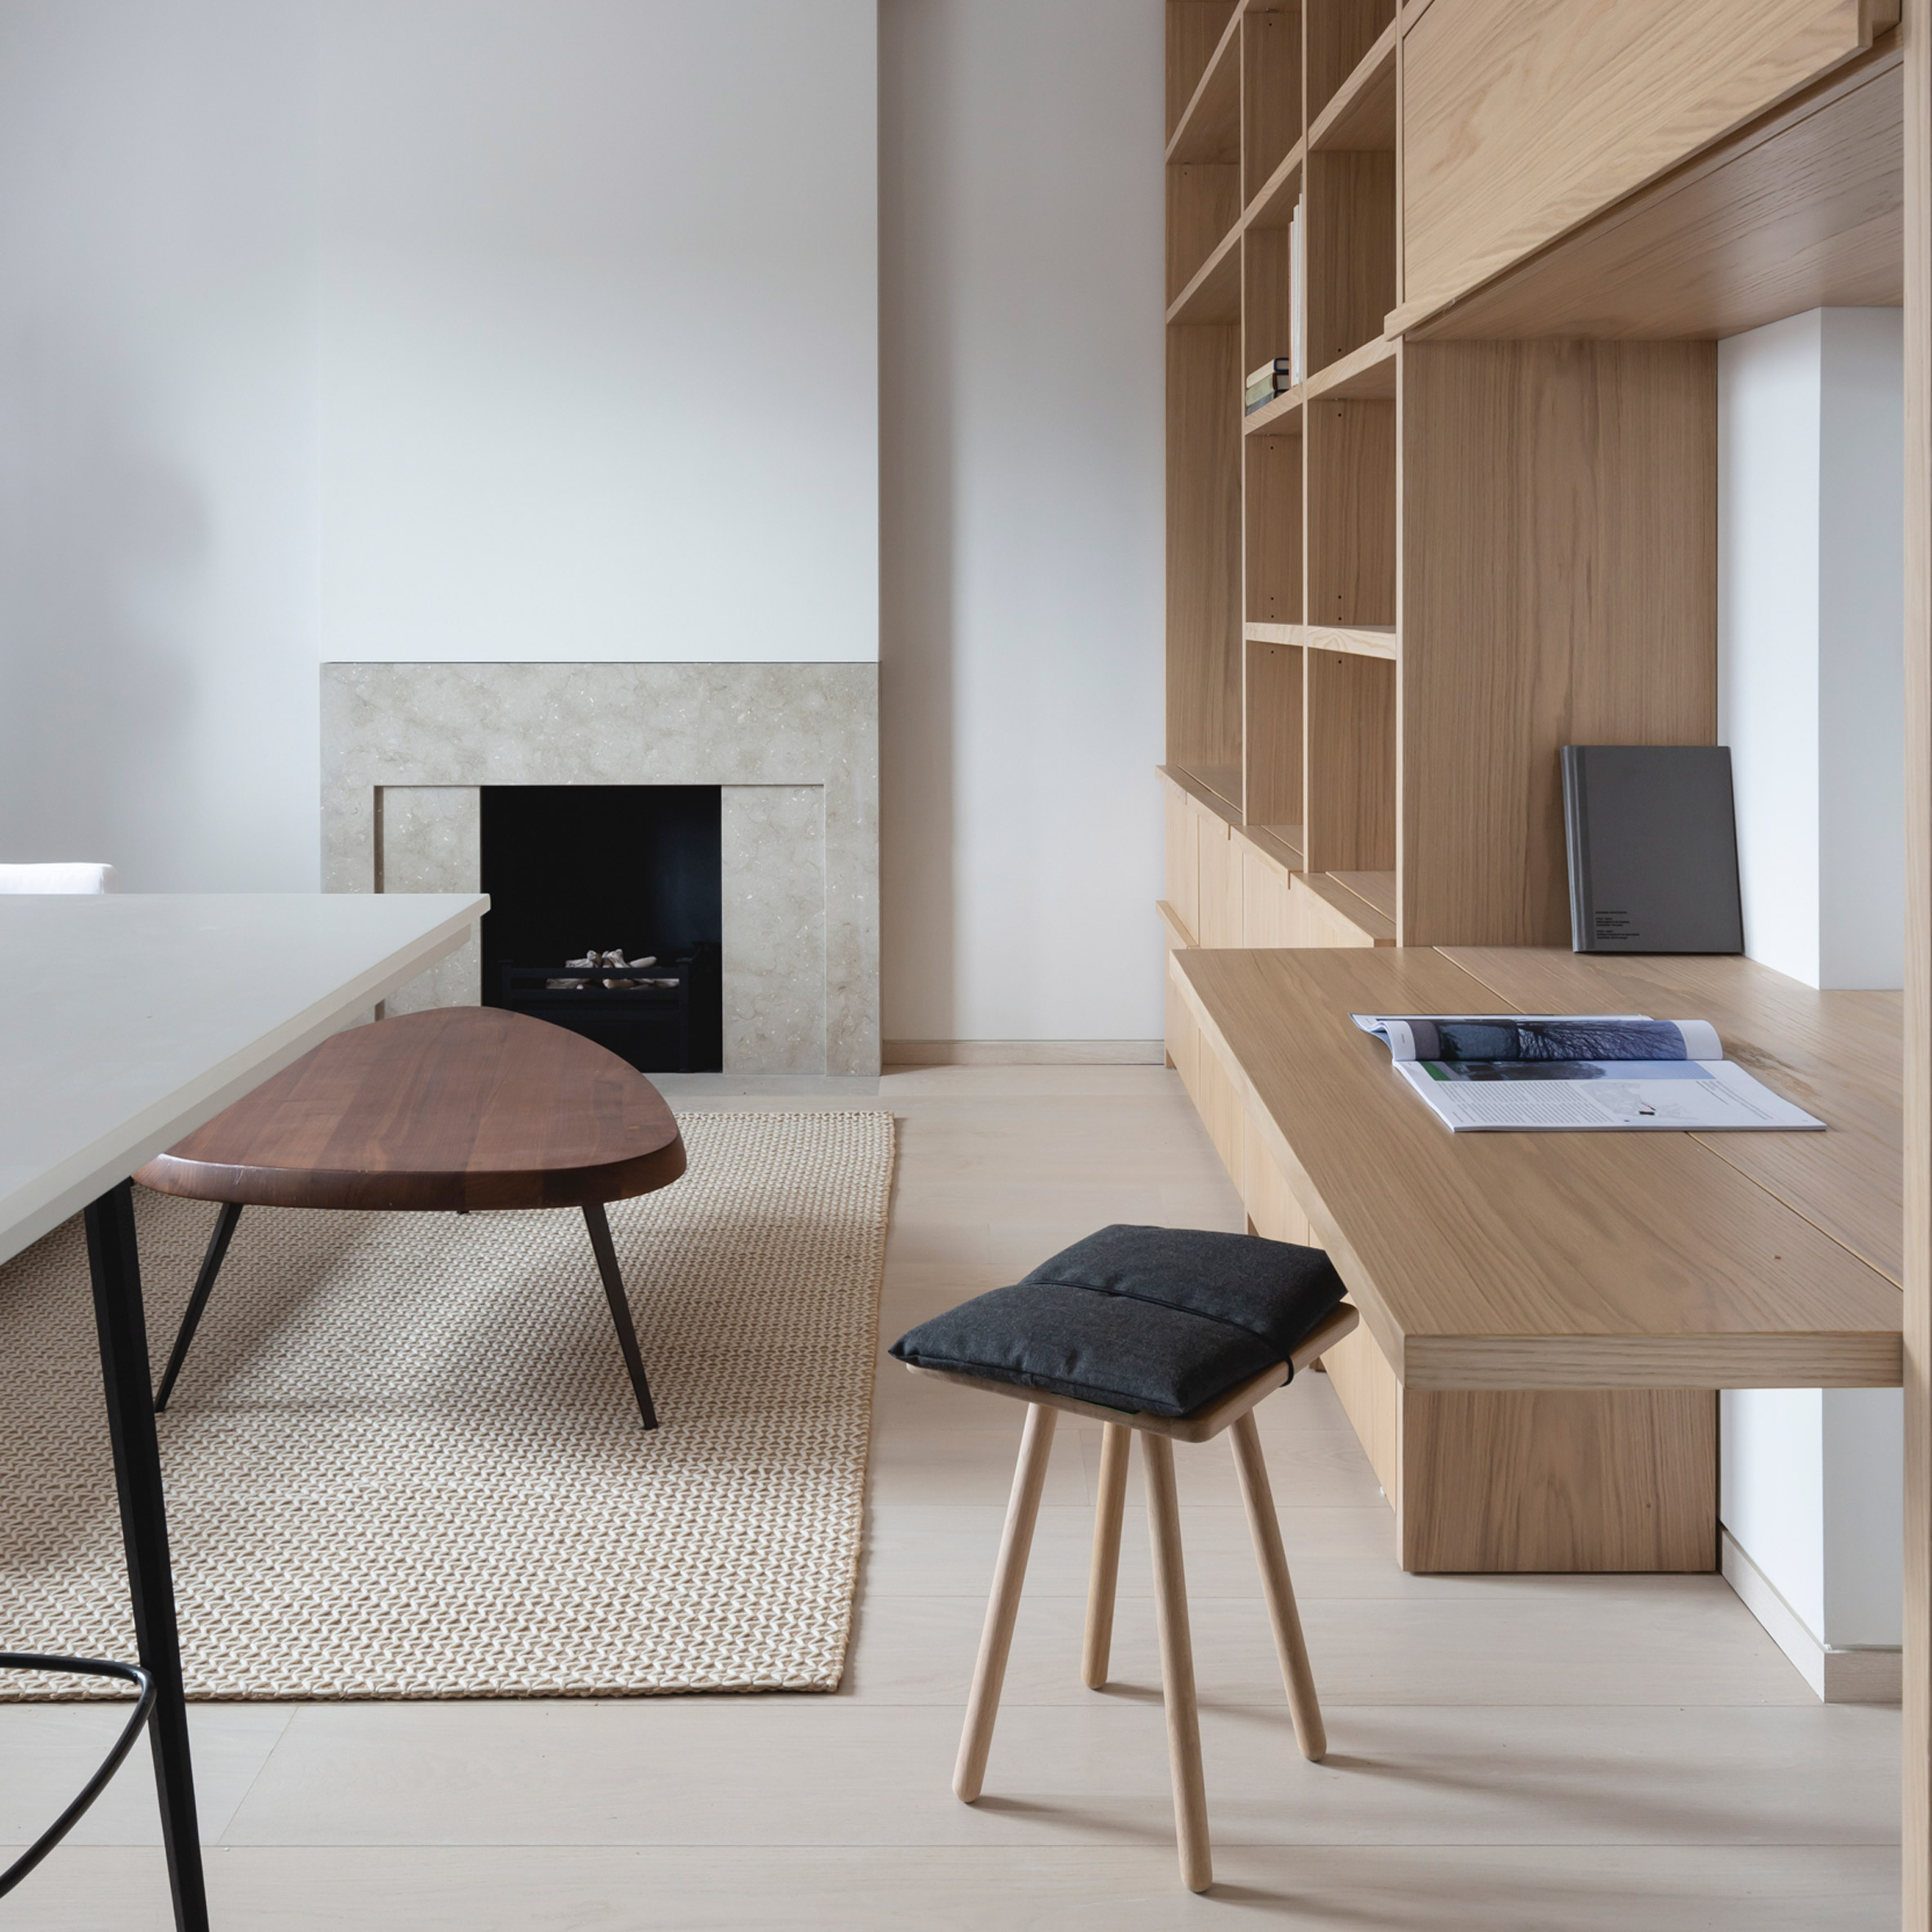 Folding desk in Mayfair pied-à-terre interior by Mwai